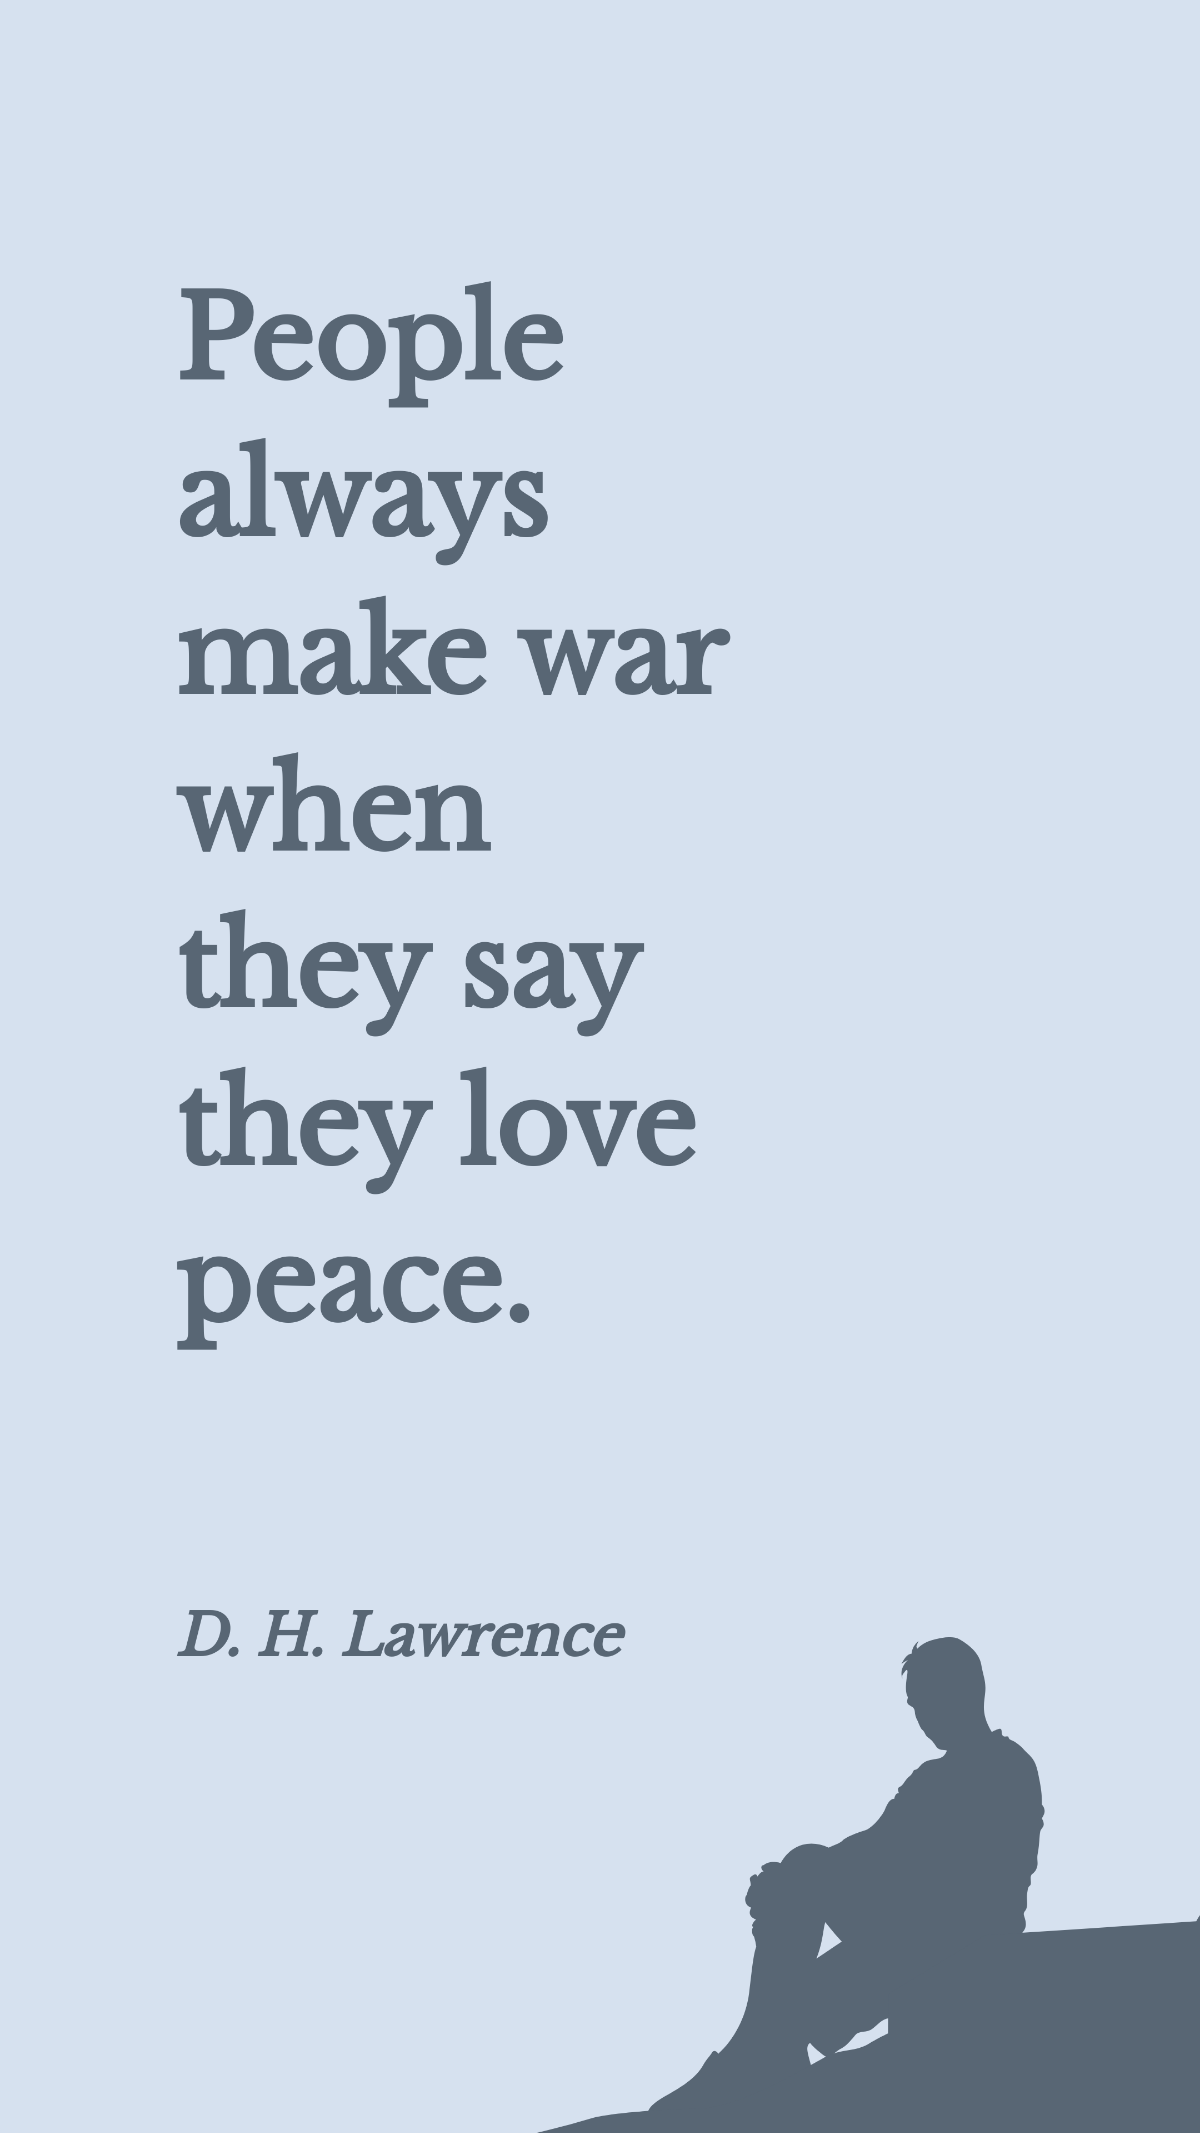 D. H. Lawrence - People always make war when they say they love peace.